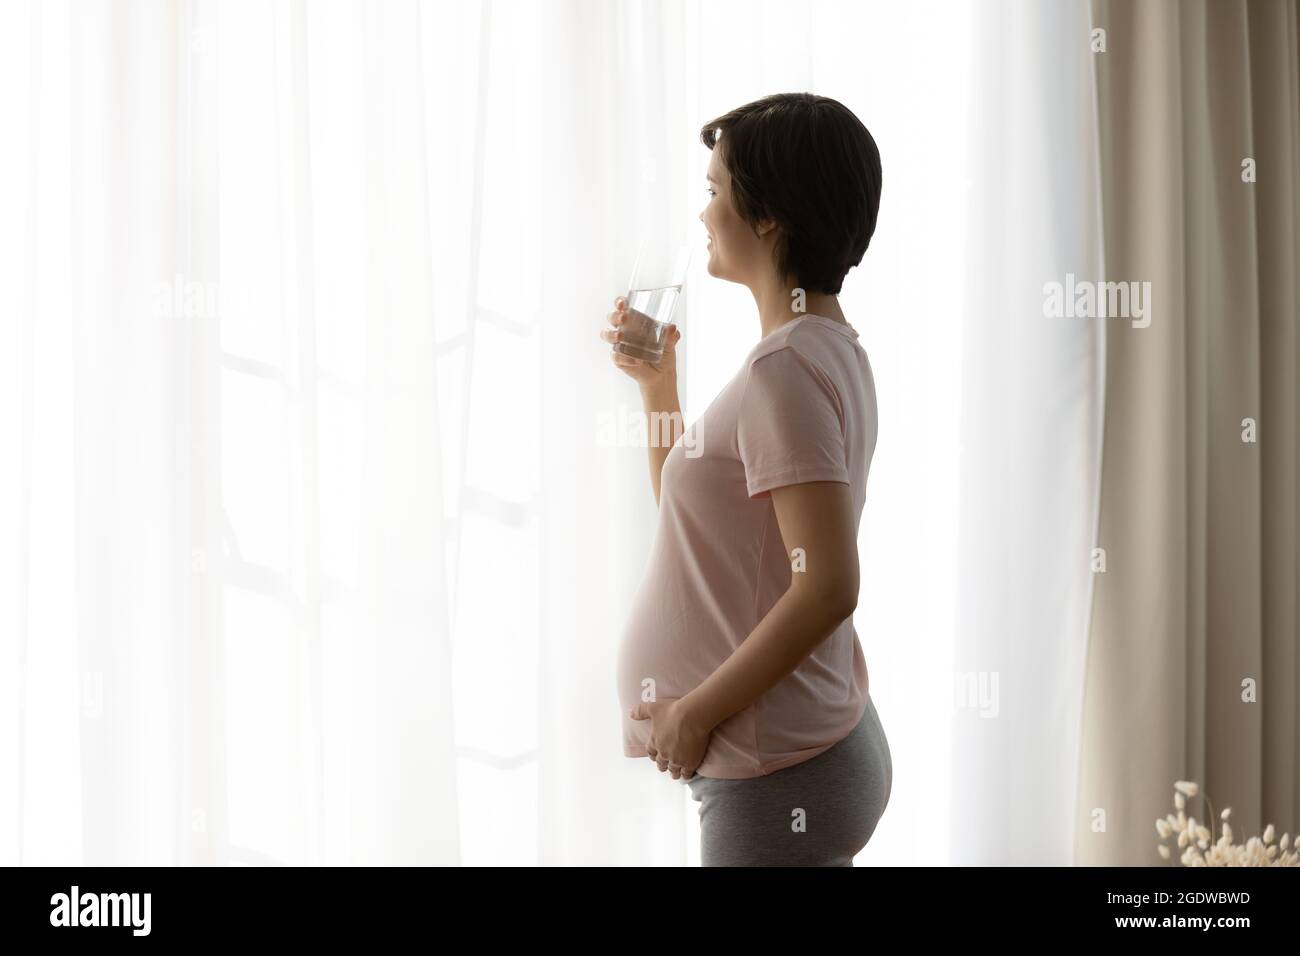 Serious thoughtful expectant mother looking put of window Stock Photo